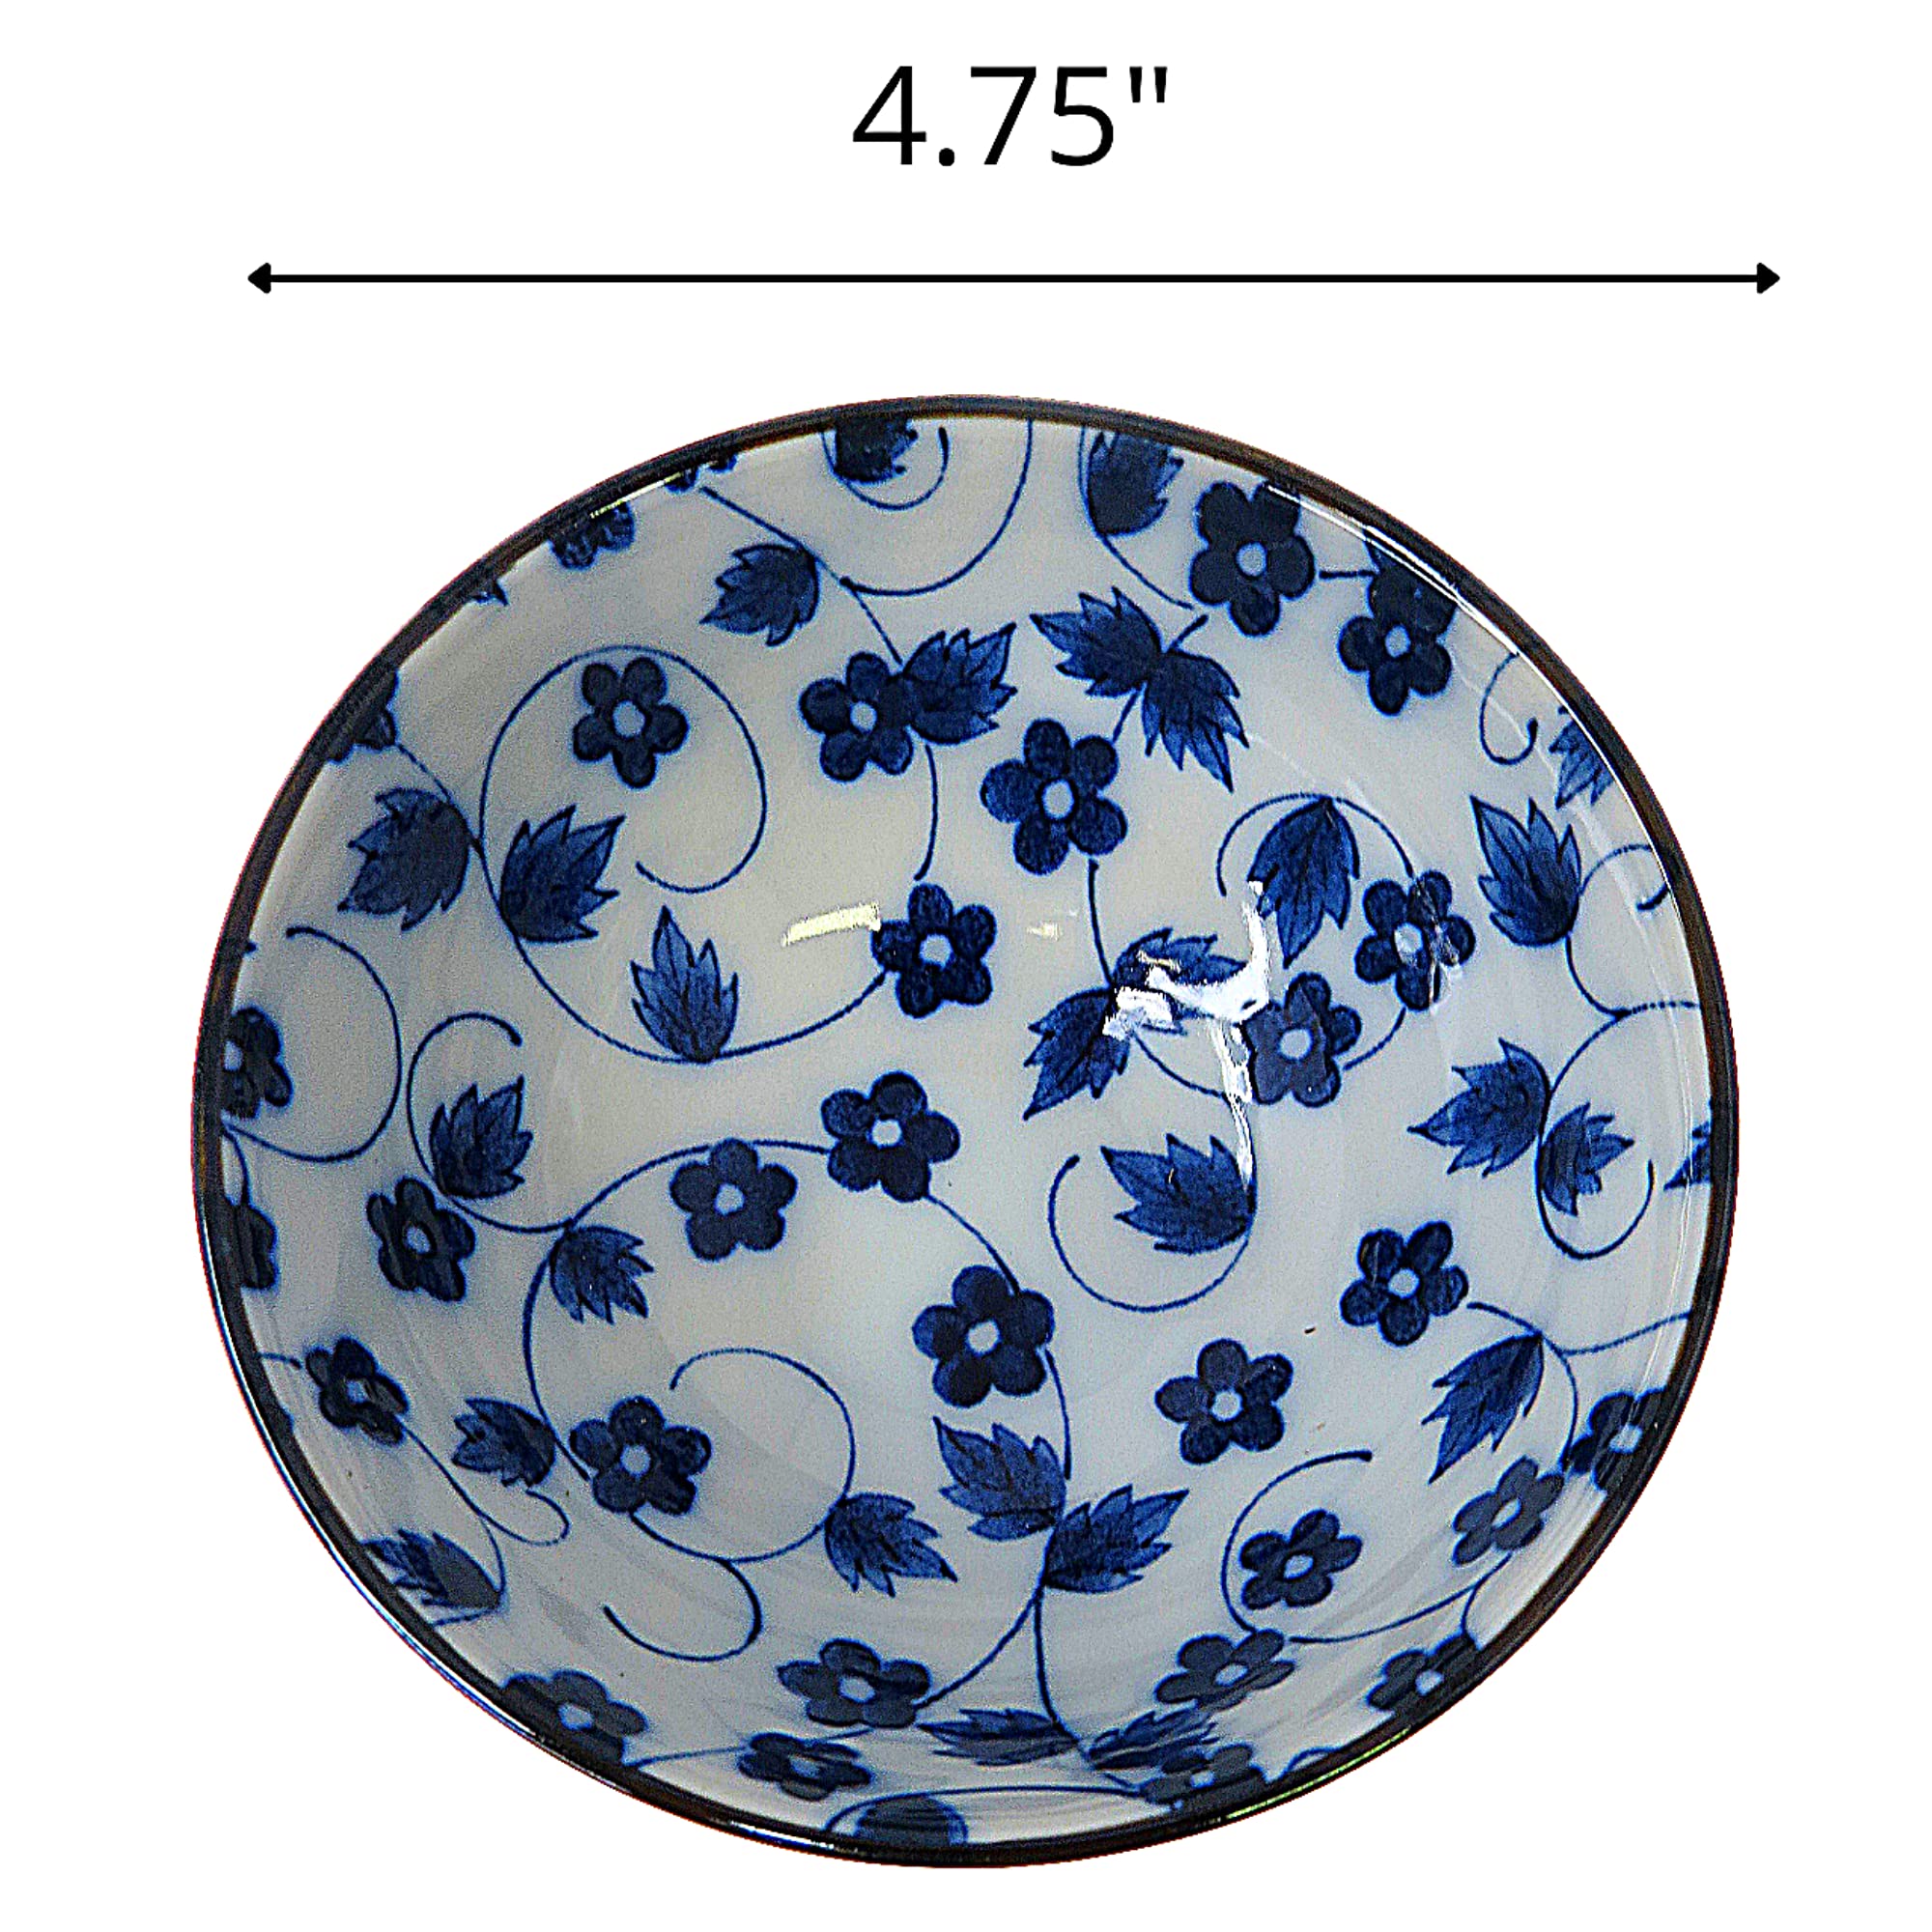 Four Piece Ceramic Donburi Bowl Set, Miso Soup Bowls with Blue and White Floral Designs, Kitchenware Housewarming and Wedding Shower Gifts, 4.75 Inches